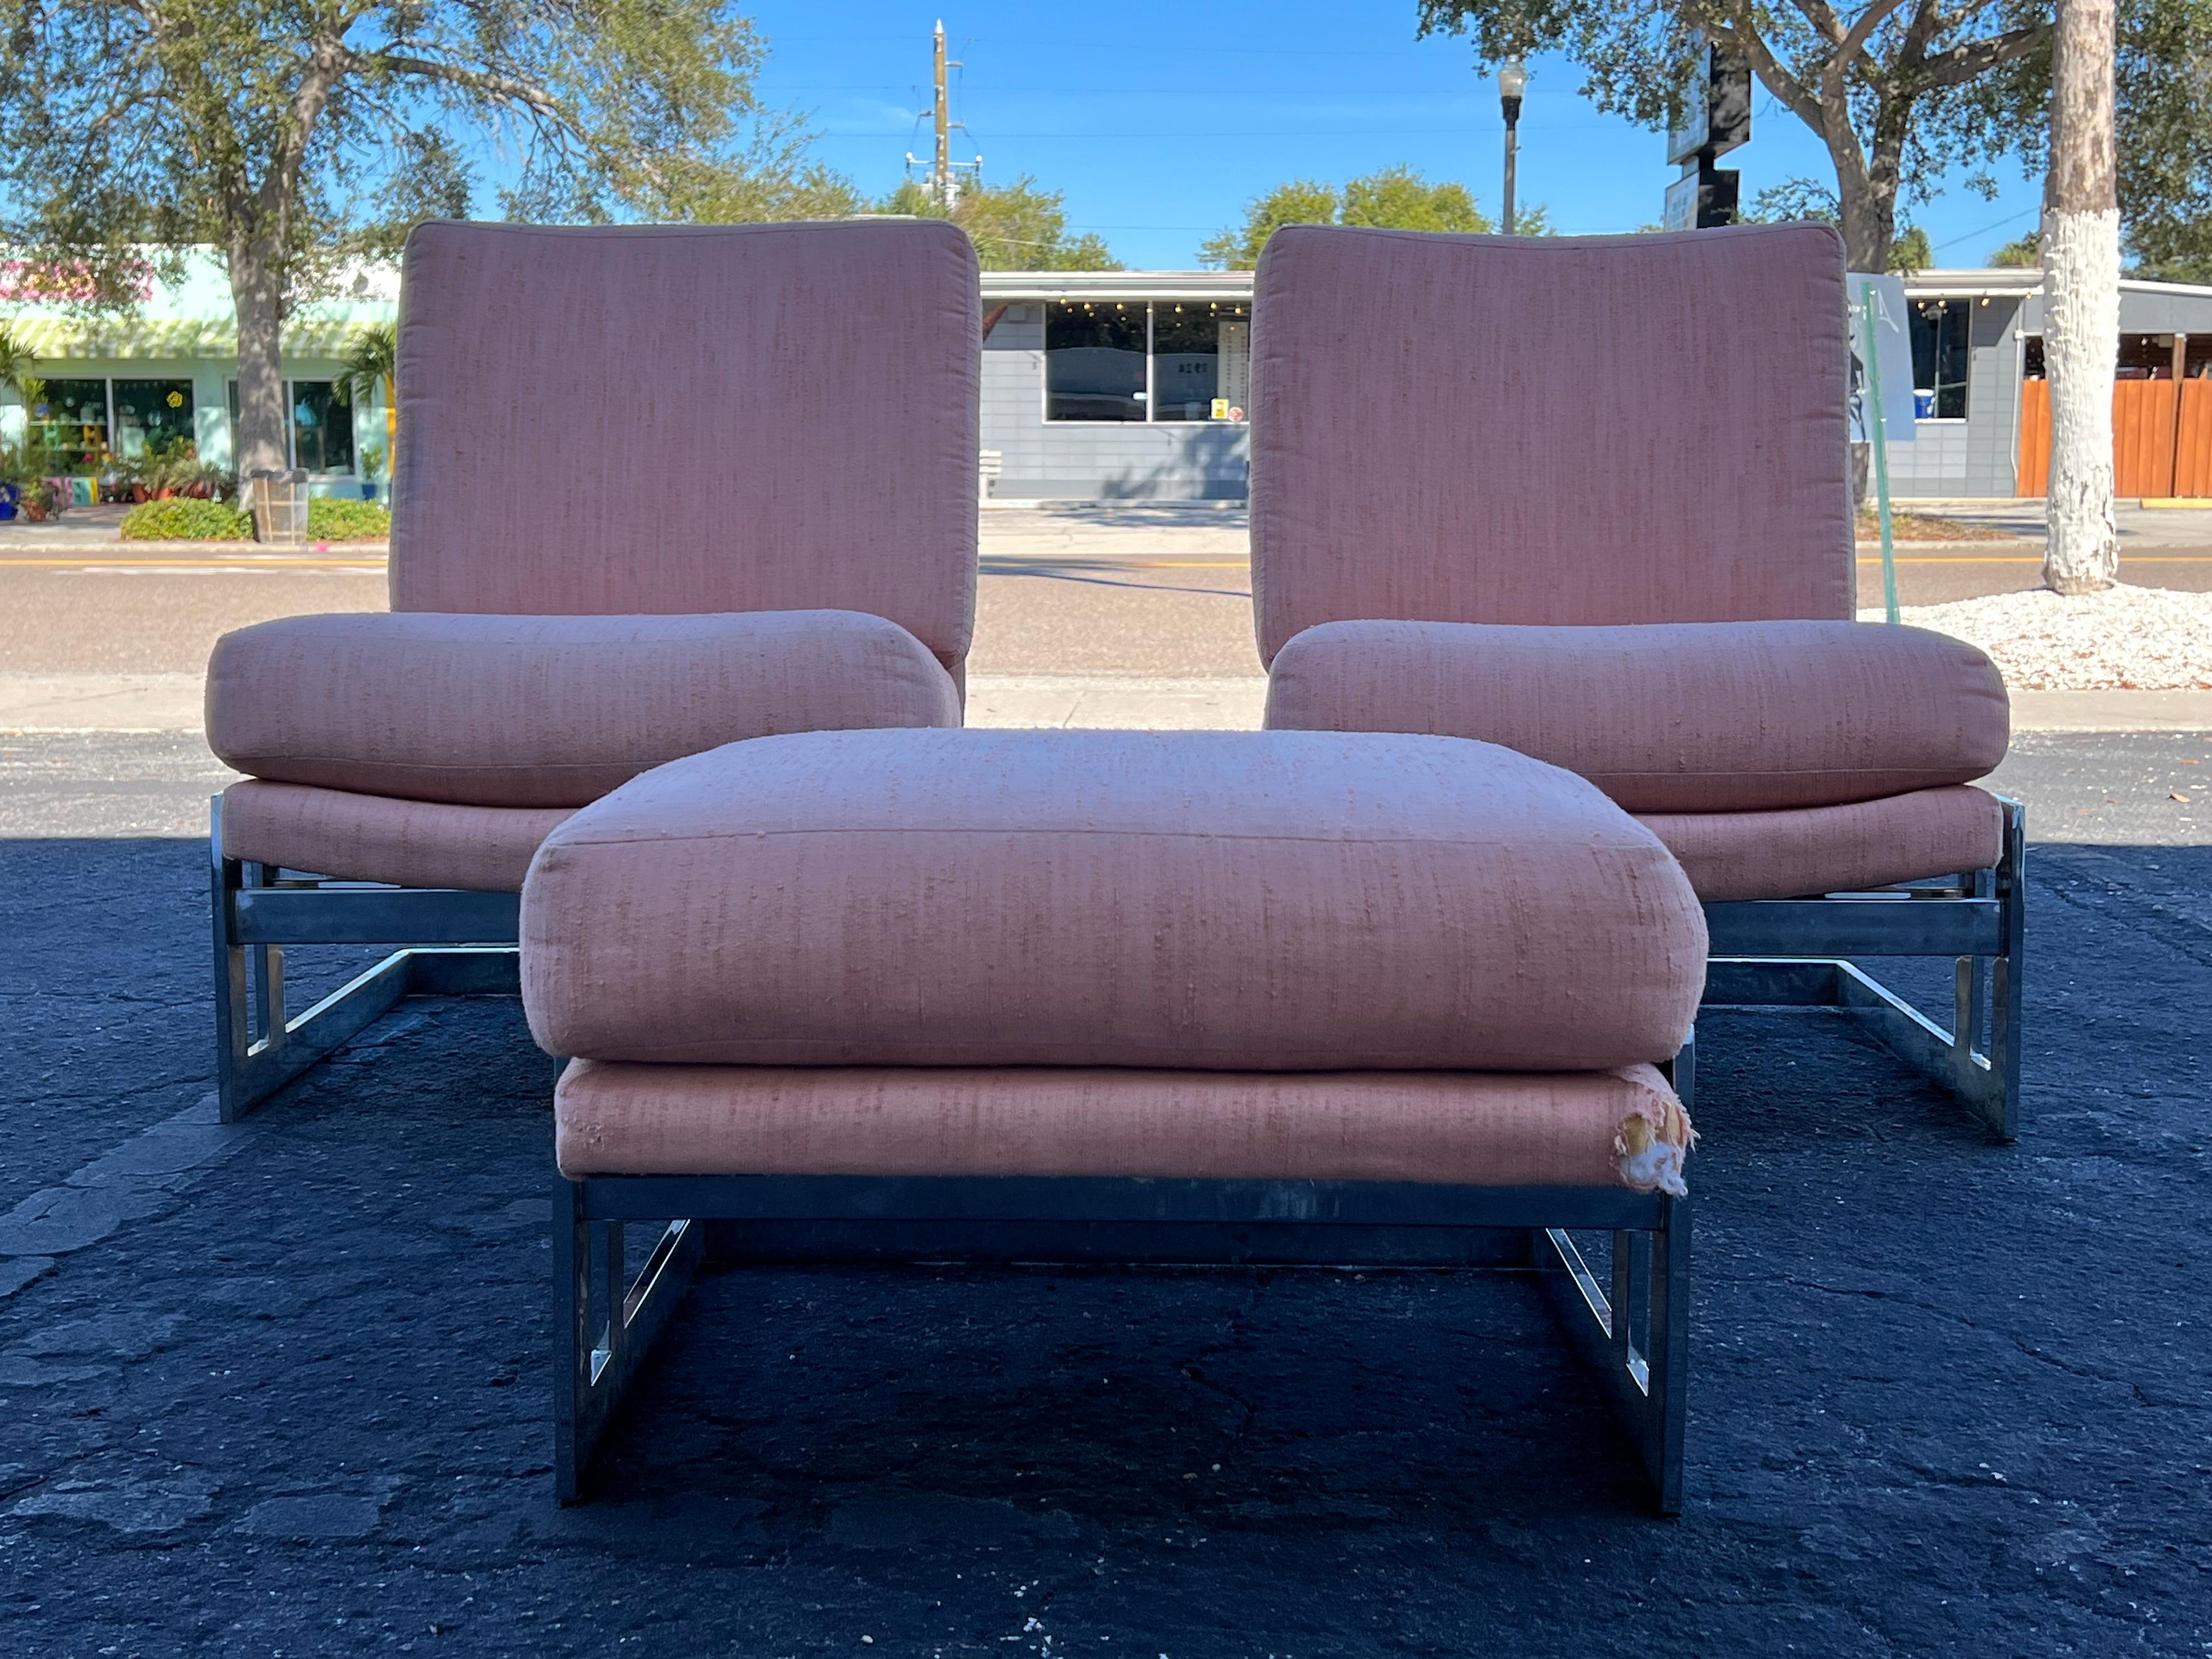 Steel A Pair Of Vintage Milo Baughman Cantilever Slipper Chairs With Ottoman For Sale